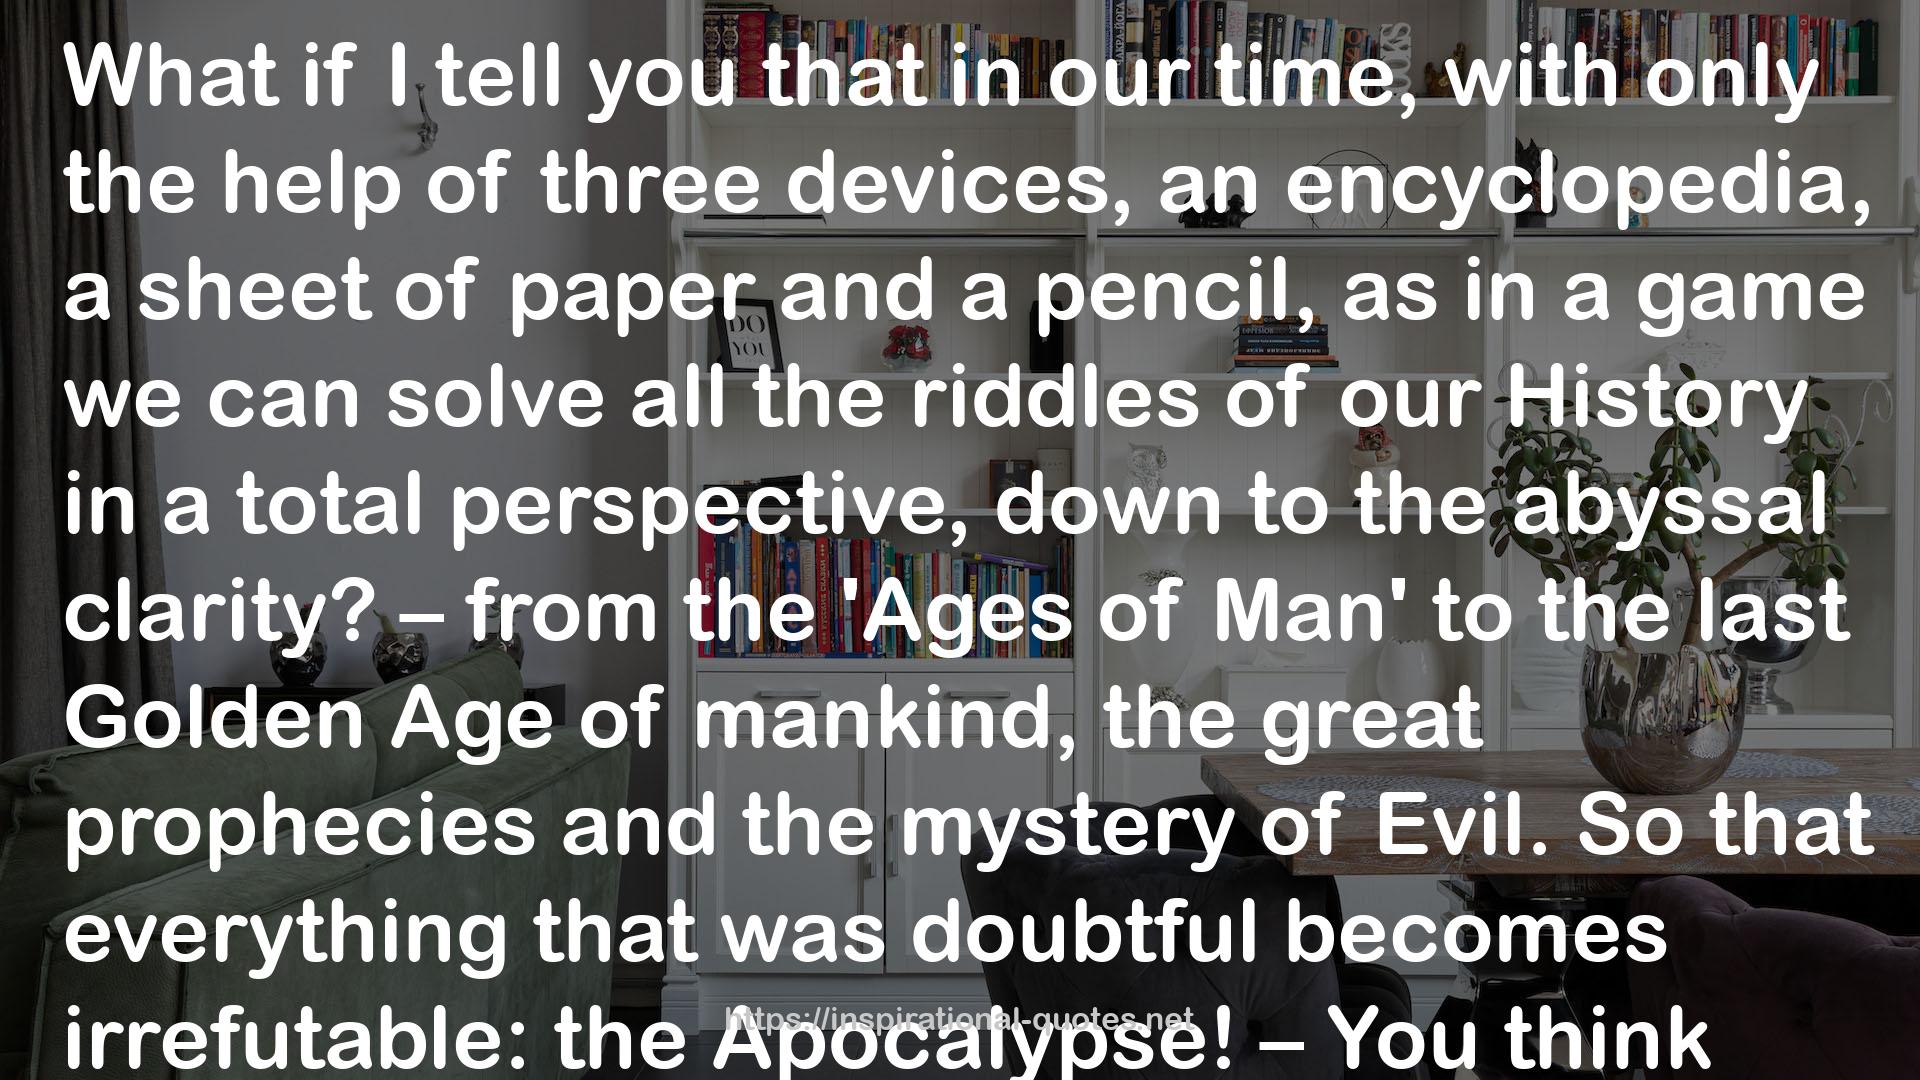 Novus Ordo: An Introduction to the Apocalypse or Geometry of End Times (Manifesto) QUOTES